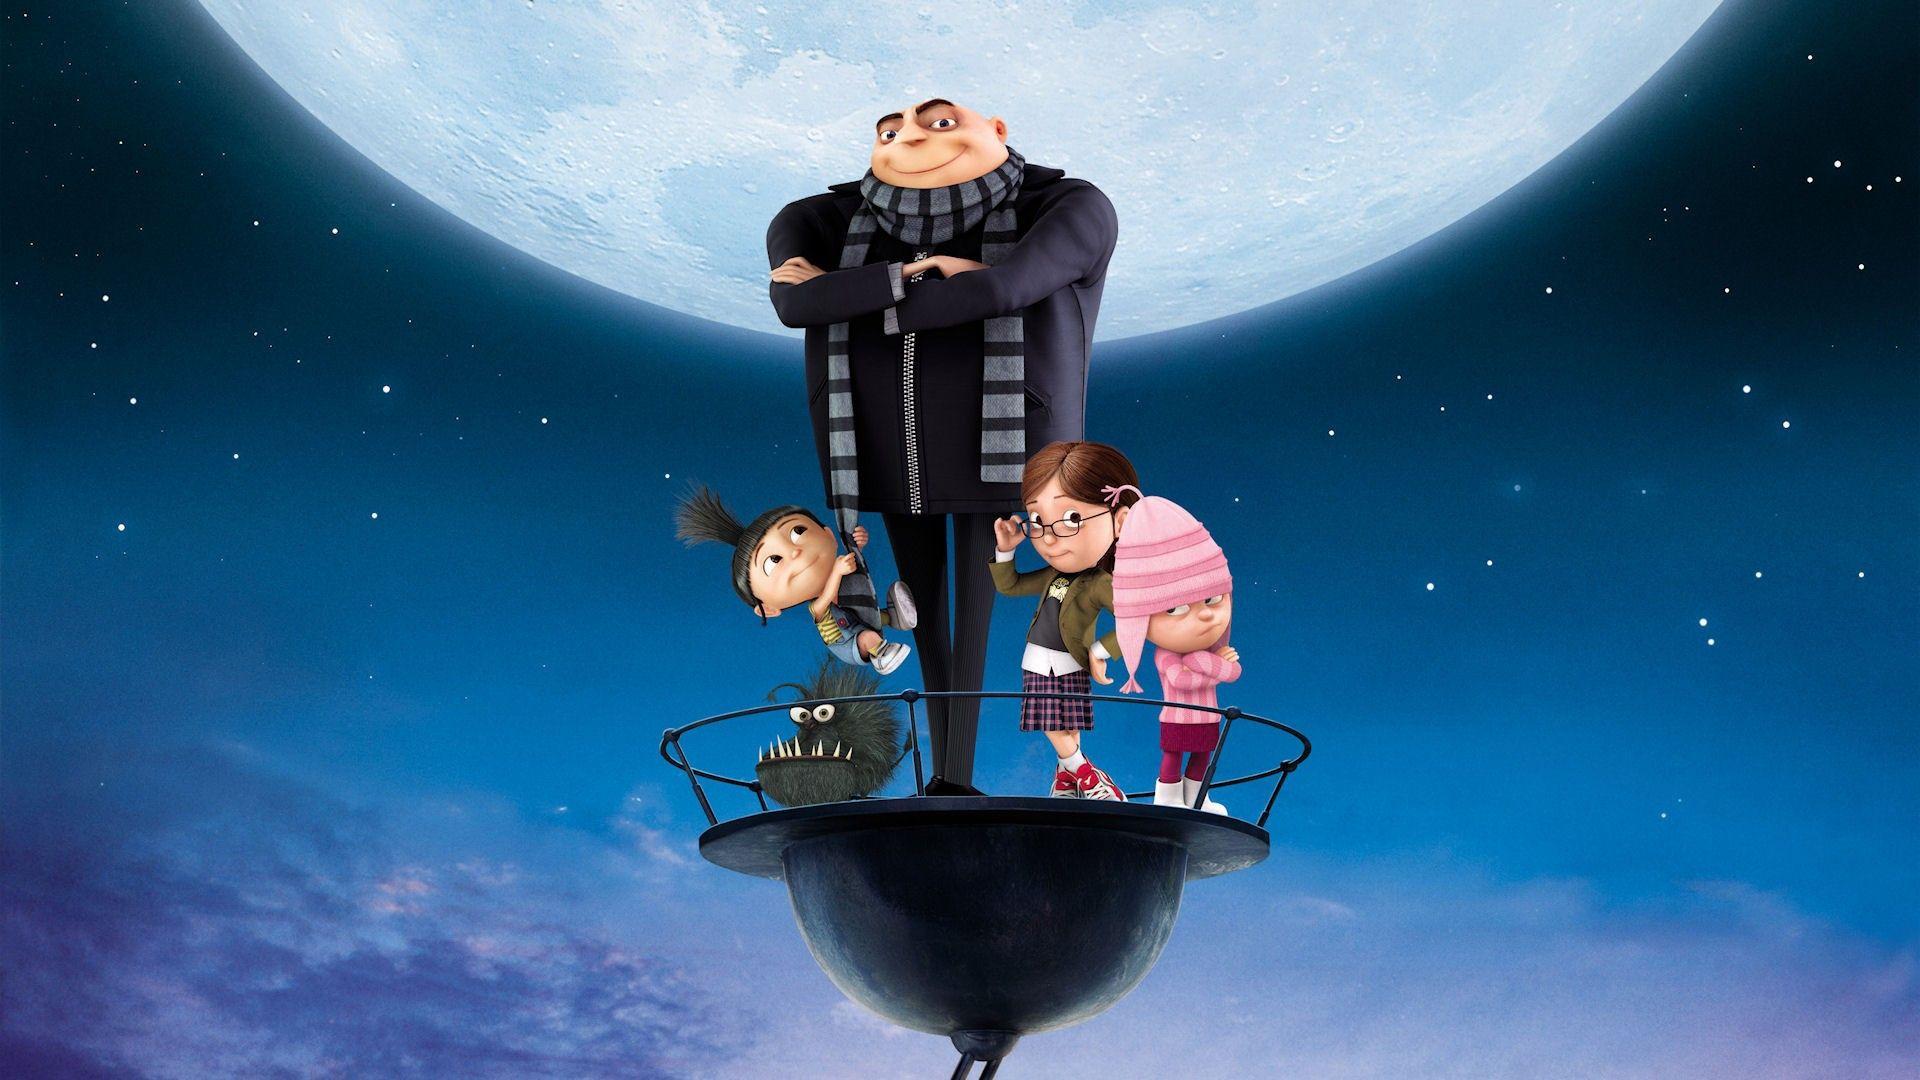 Despicable Me iPhone Wallpaper Gallery 640x1136PX